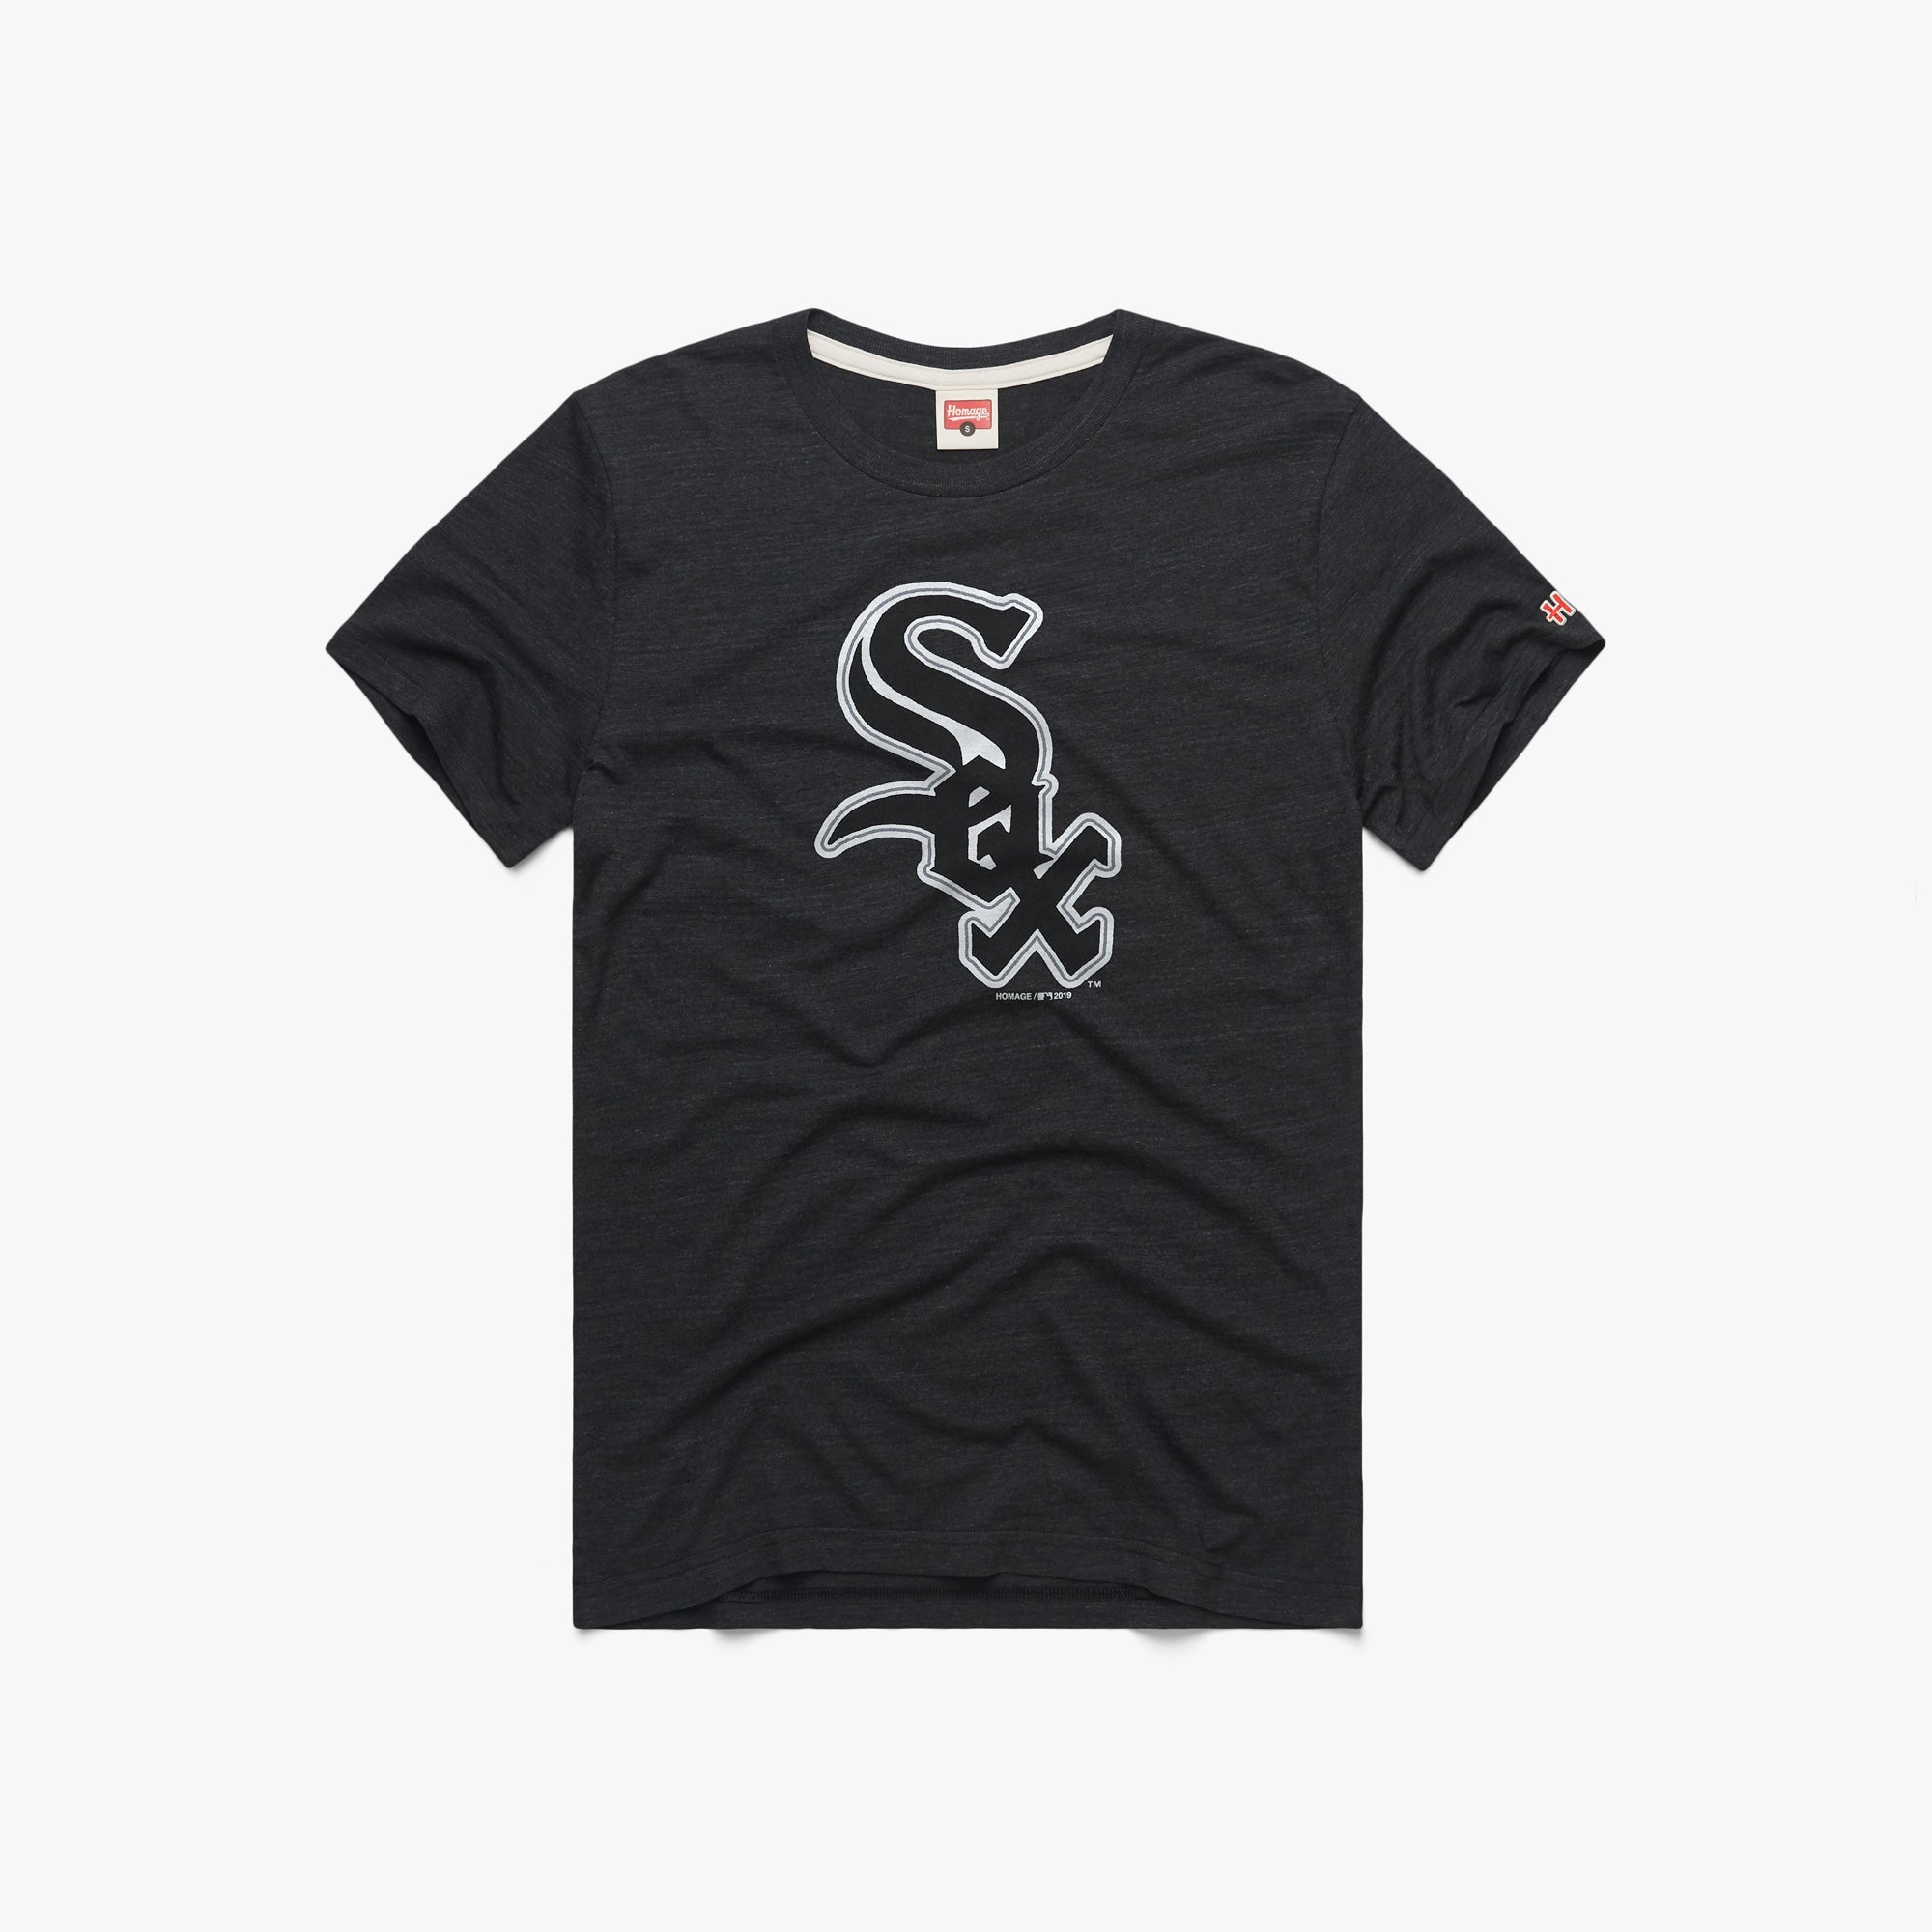 Chicago White Sox '91 T-Shirt from Homage. | Charcoal | Vintage Apparel from Homage.